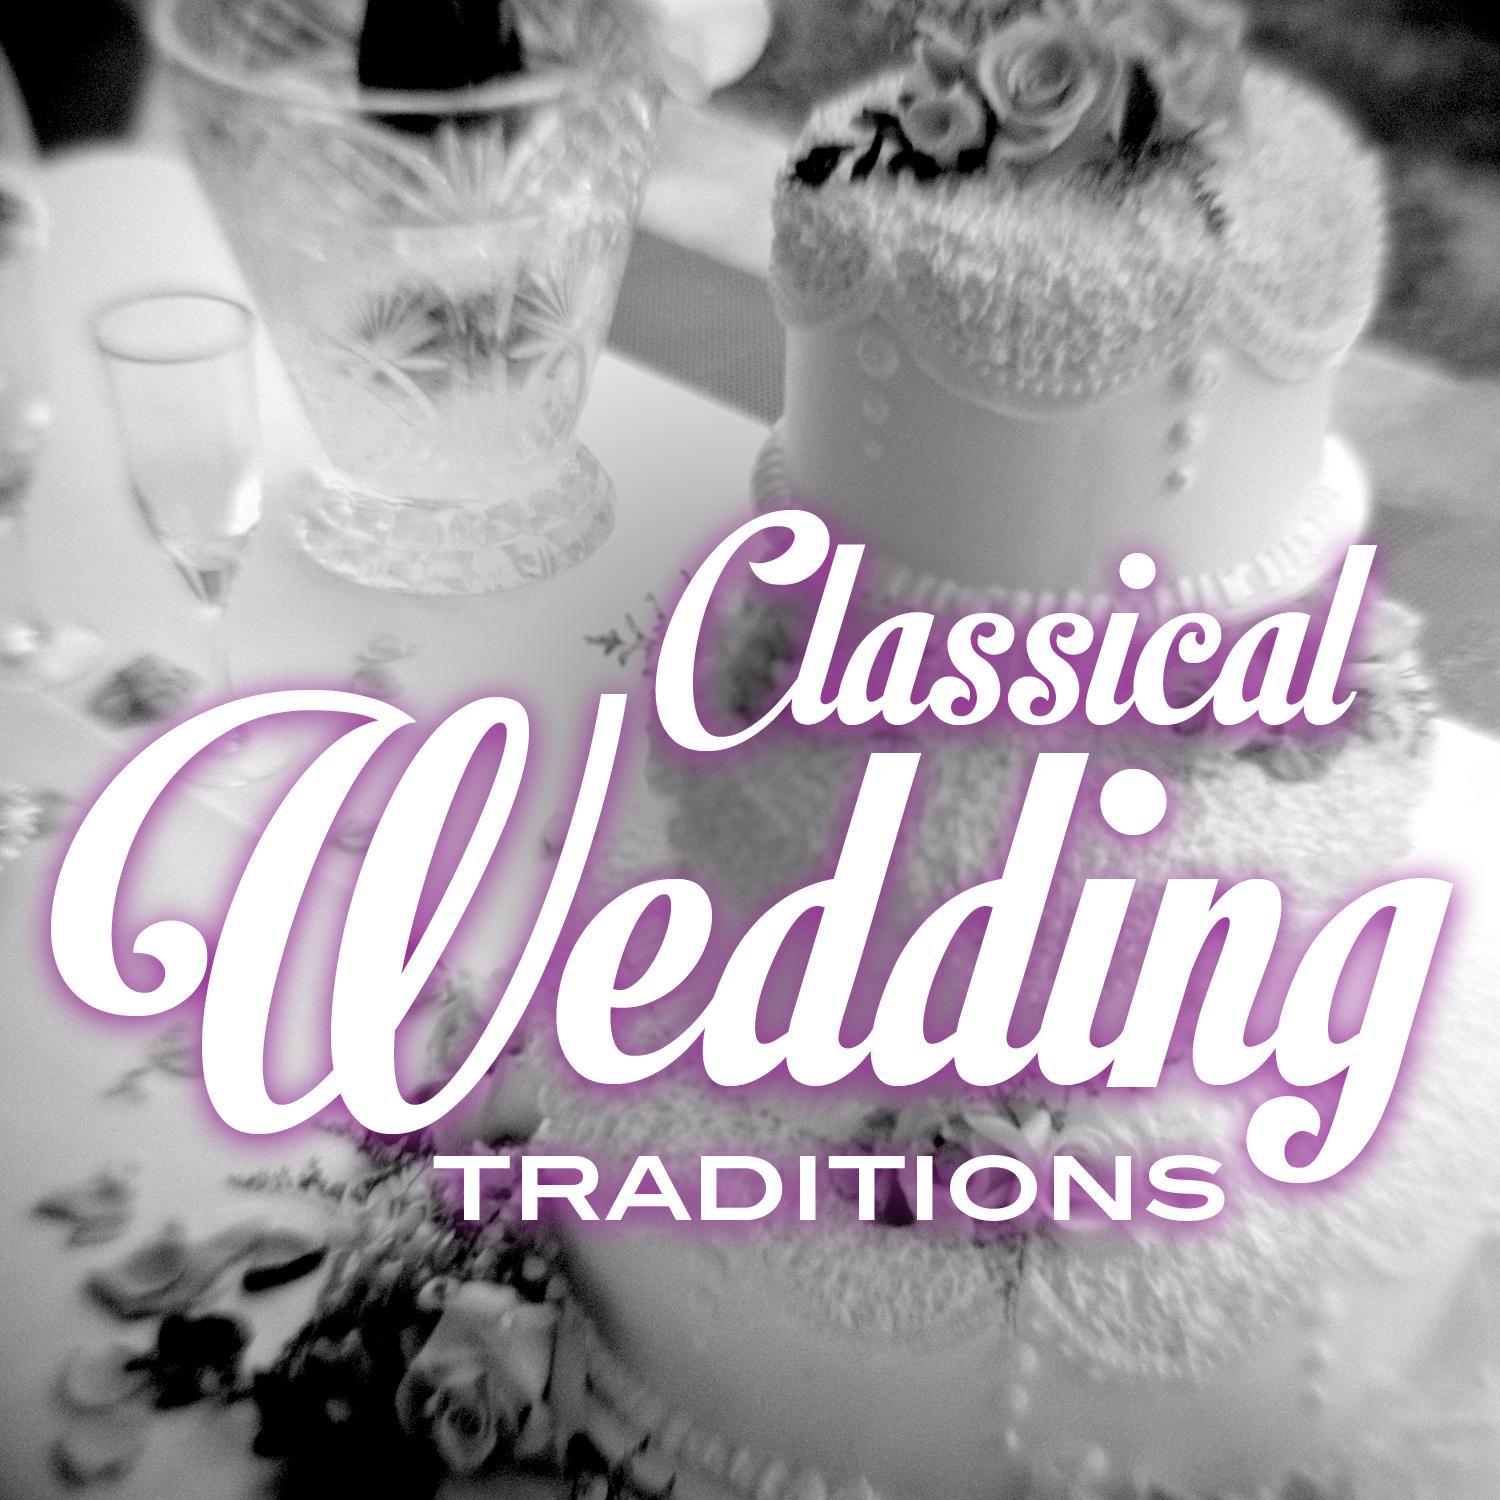 Classical Wedding Traditions